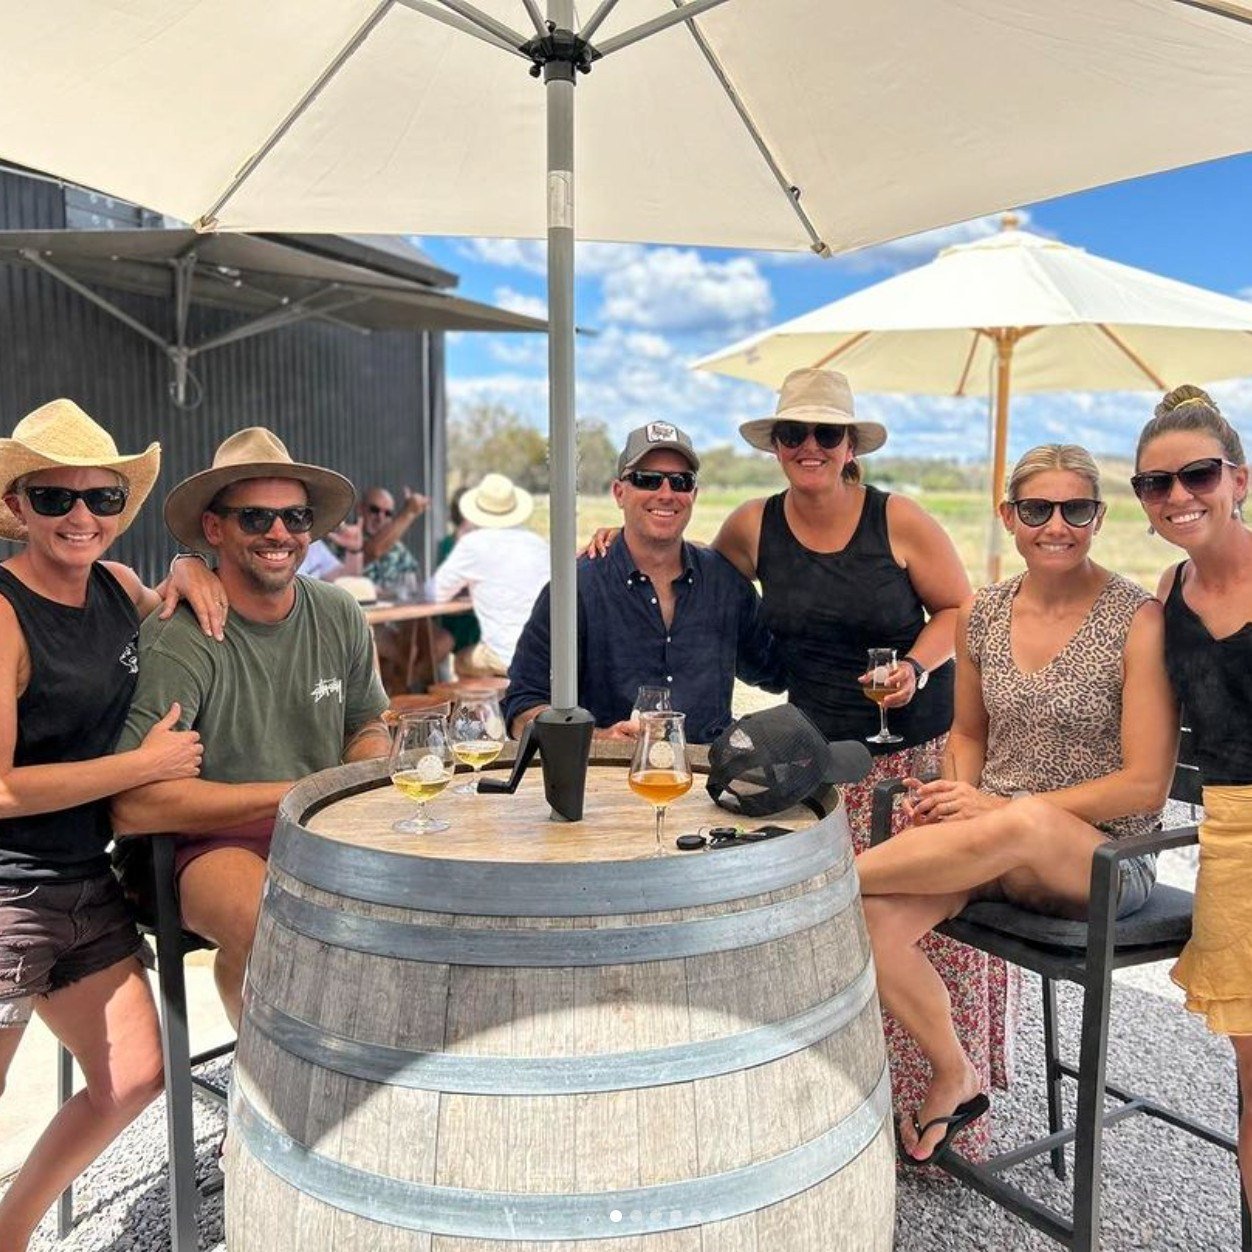 In town for the weekend? We&rsquo;ve got you covered with all the fun Mudgee has in-store over the coming days&hellip; 😉👌
 
🚚 Spend today feasting with the @nackersmudgee  food truck pop-up at @smallbatchbrew from 12pm
 
💋 Gather your besties for